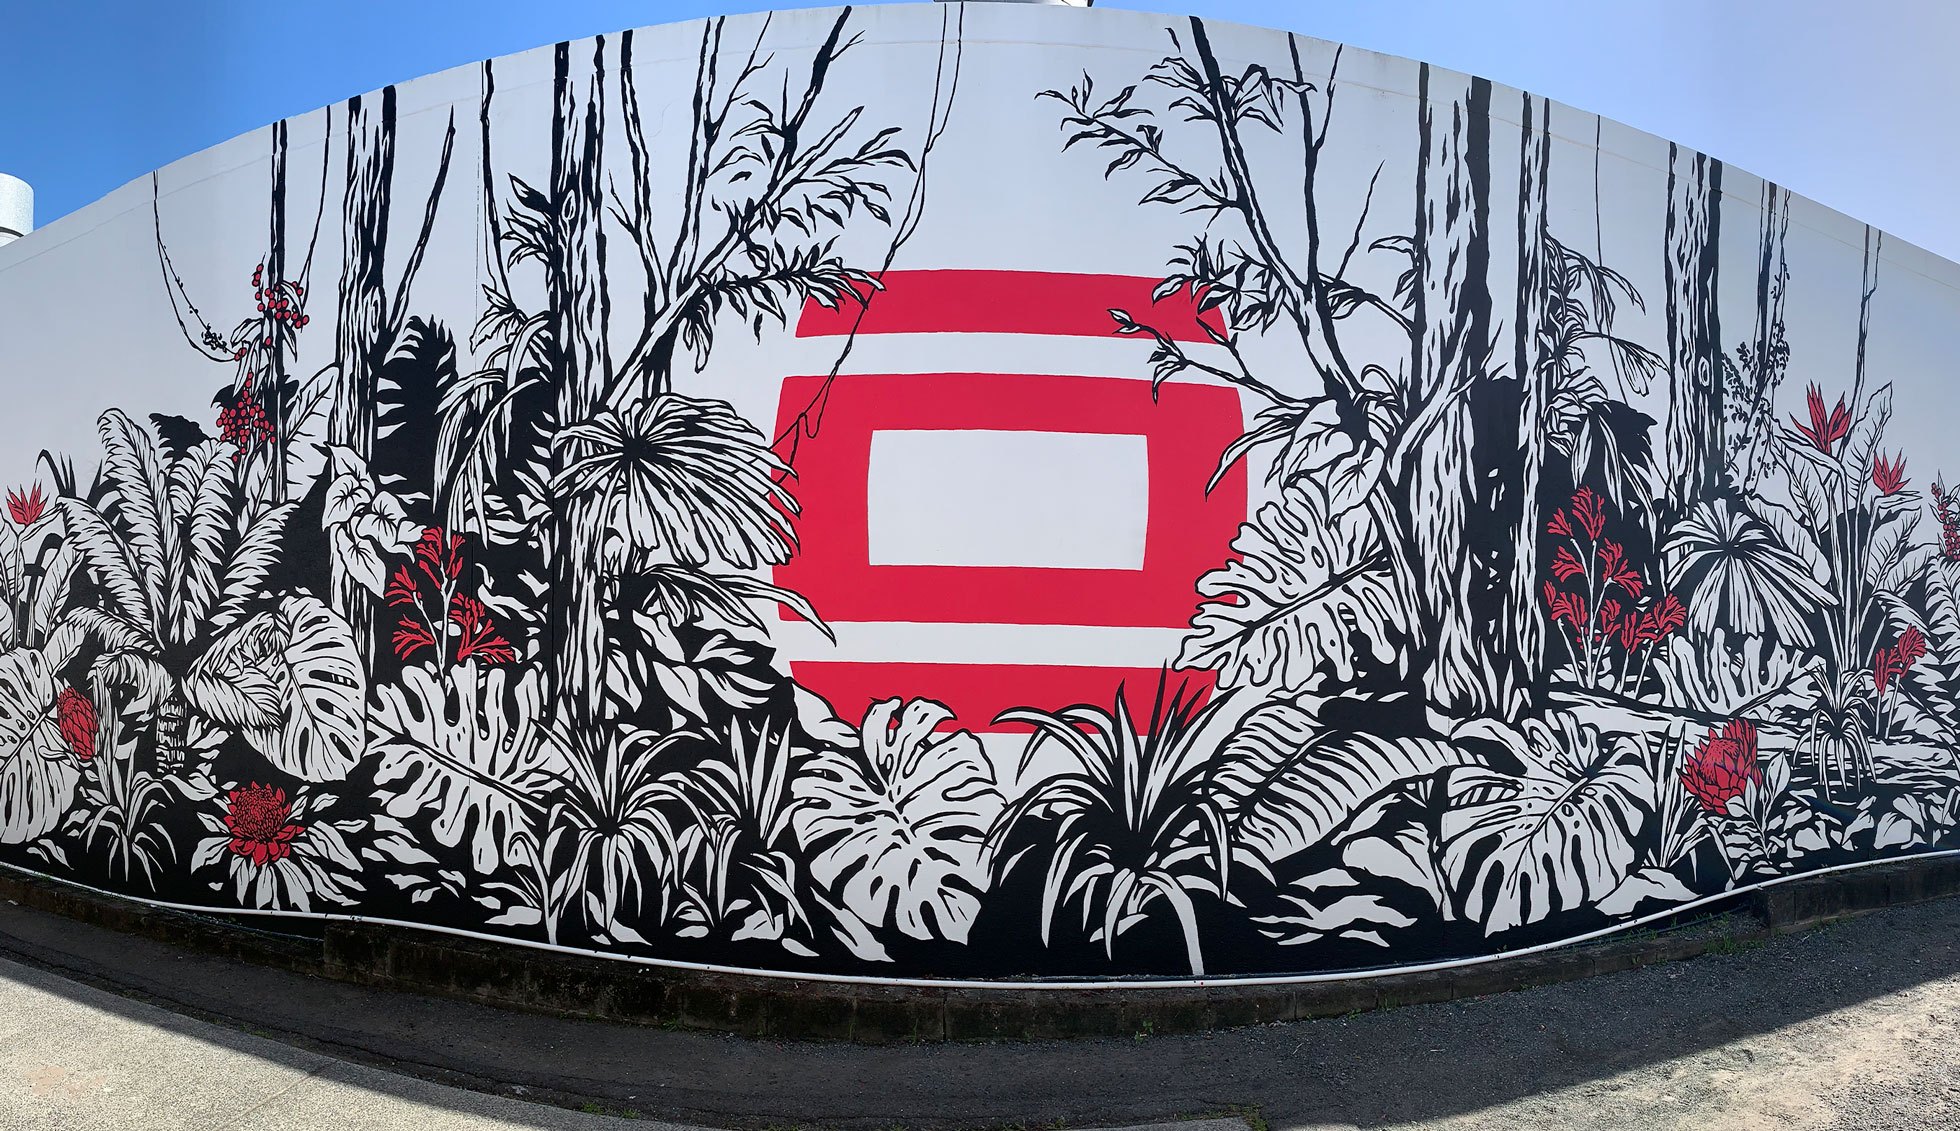 The AWOL mural features a black, white and red design in a jungle scene